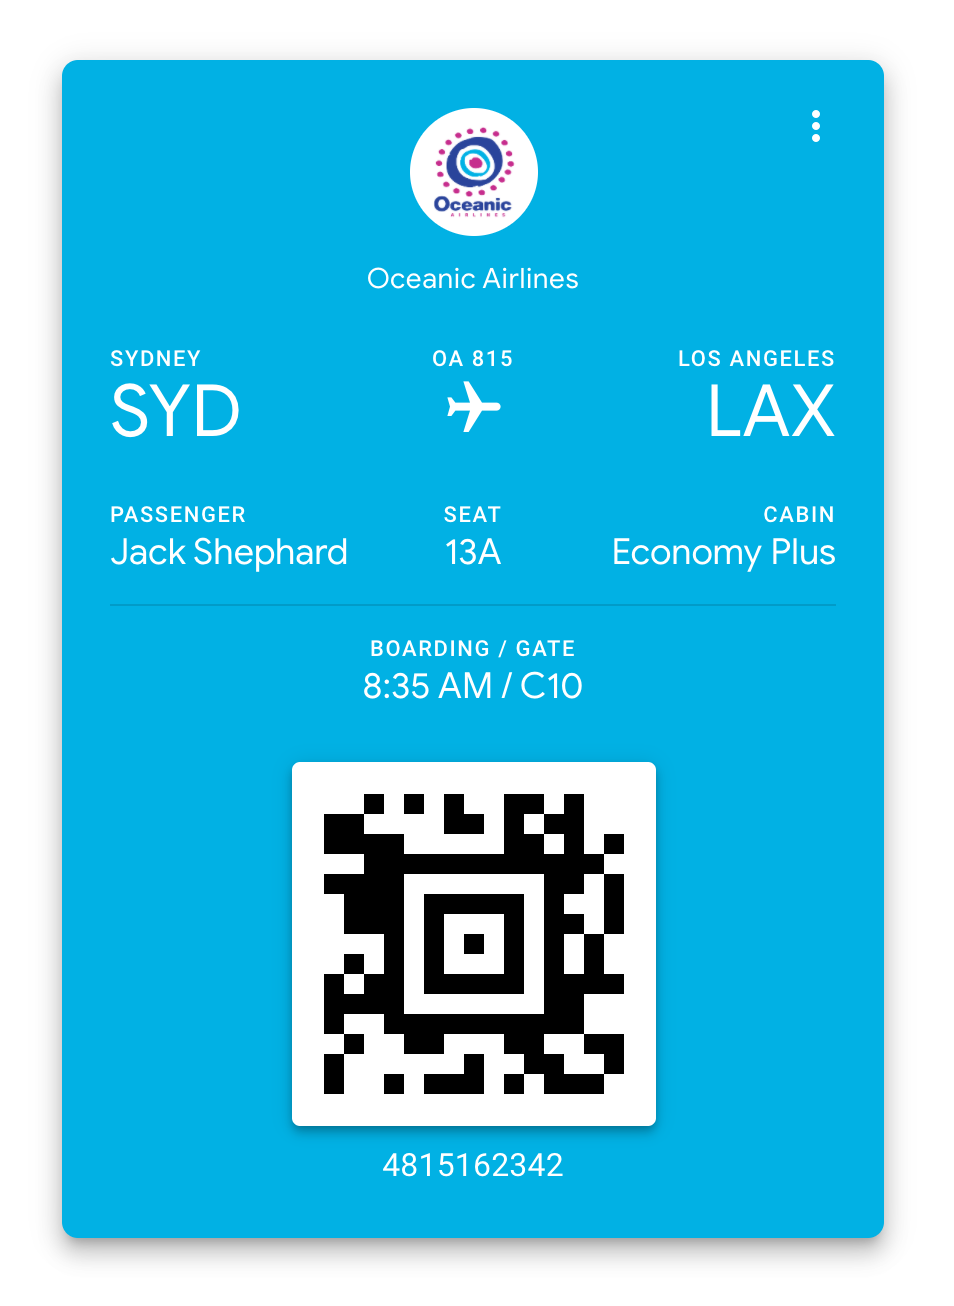 Boarding pass overrides